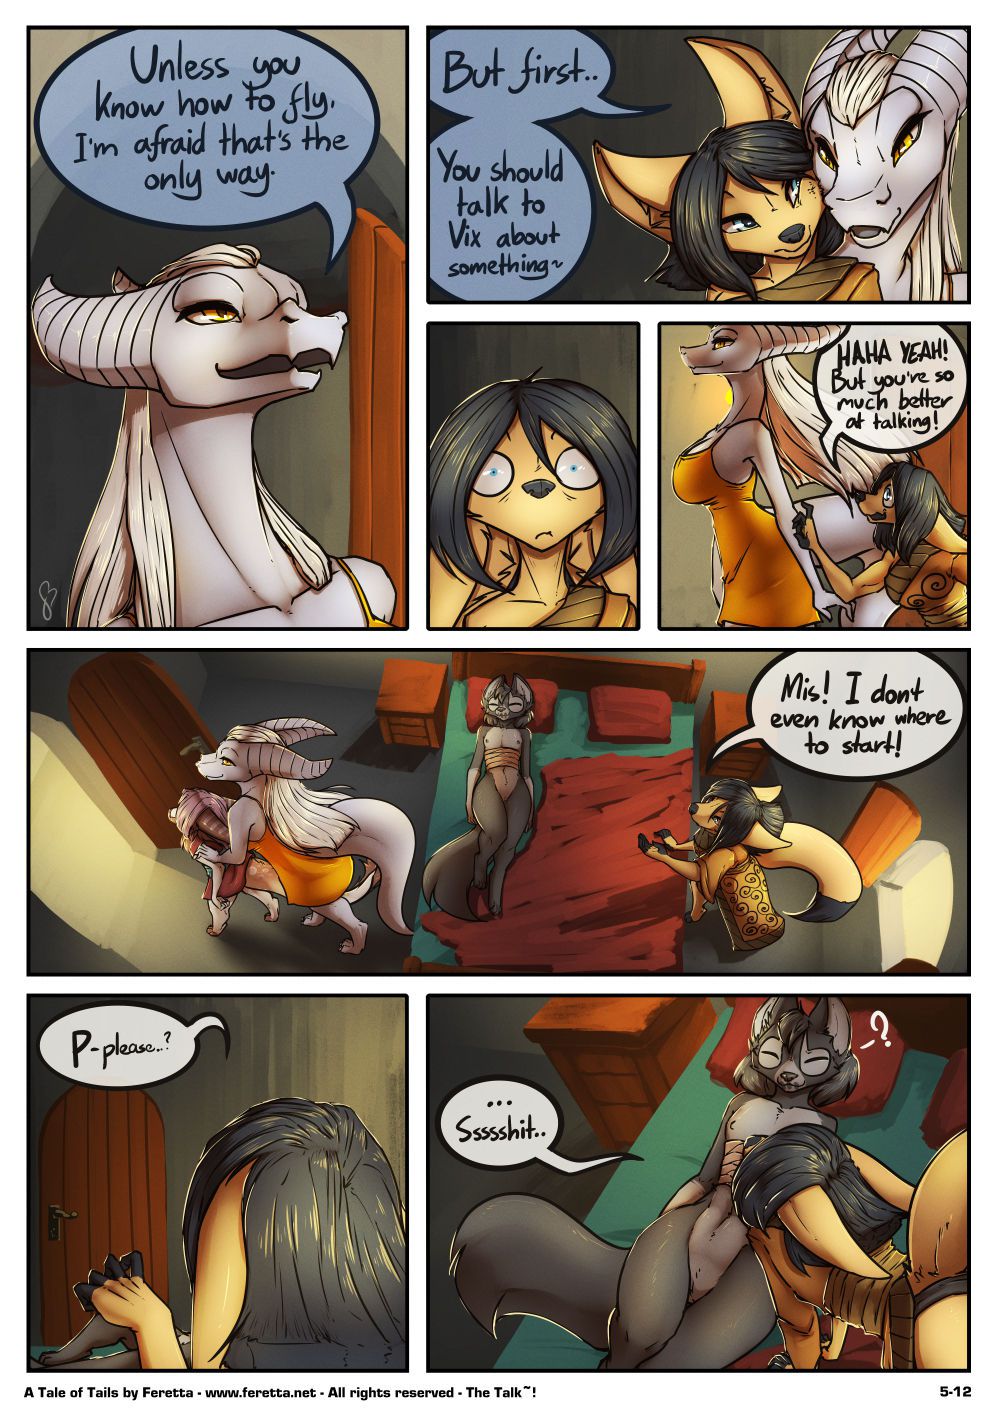 [Feretta] Farellian Legends: A Tale of Tails (w/Extras) [Ongoing] 224